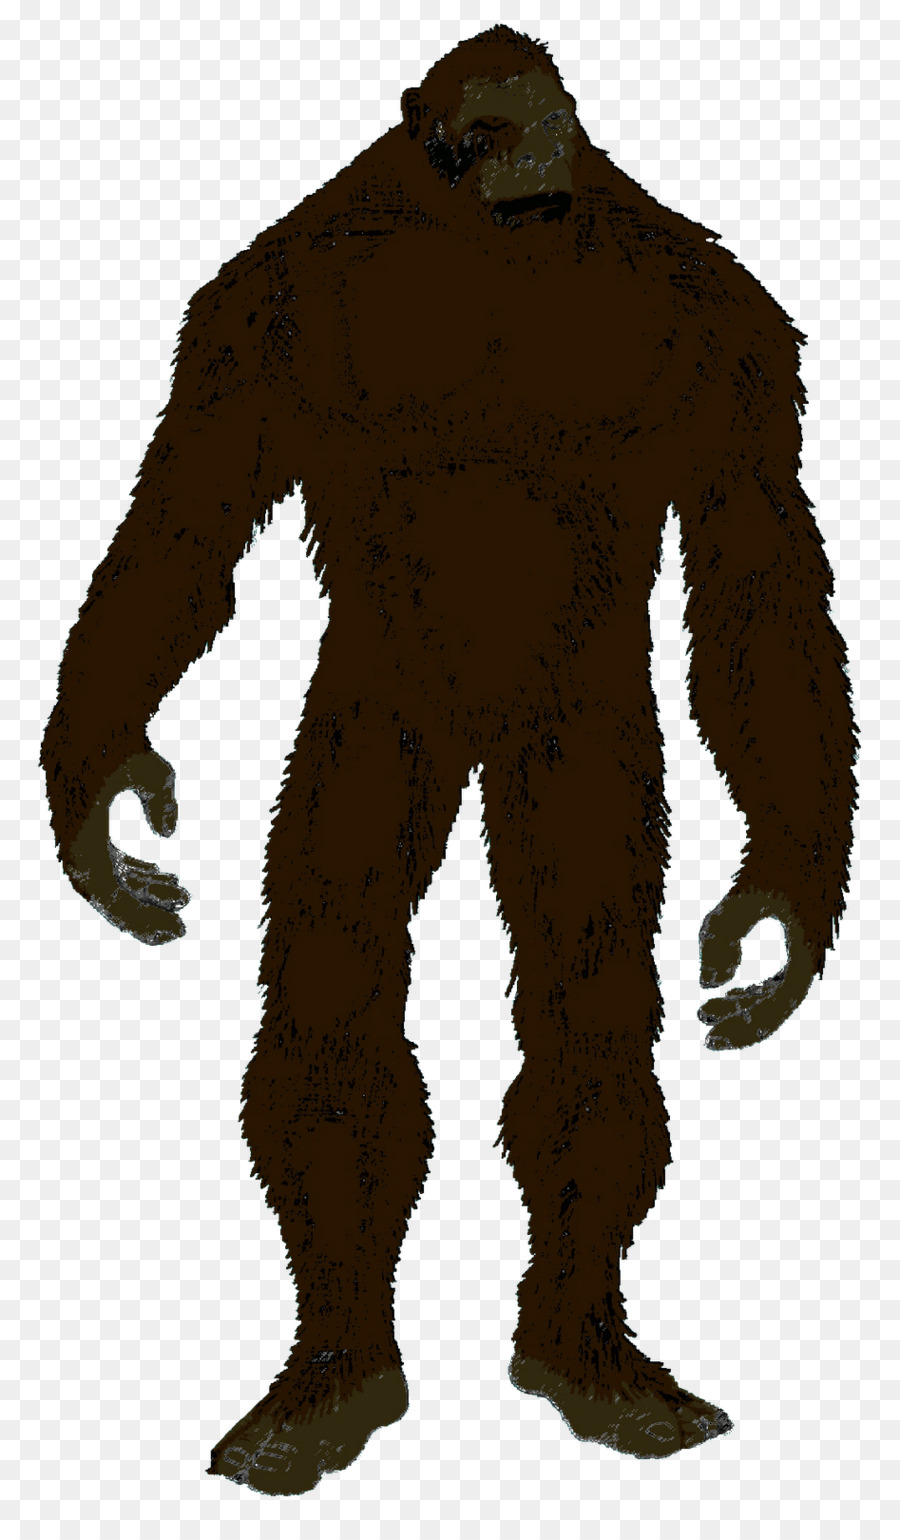 Free Sasquatch Silhouette Vector, Download Free Sasquatch Silhouette.